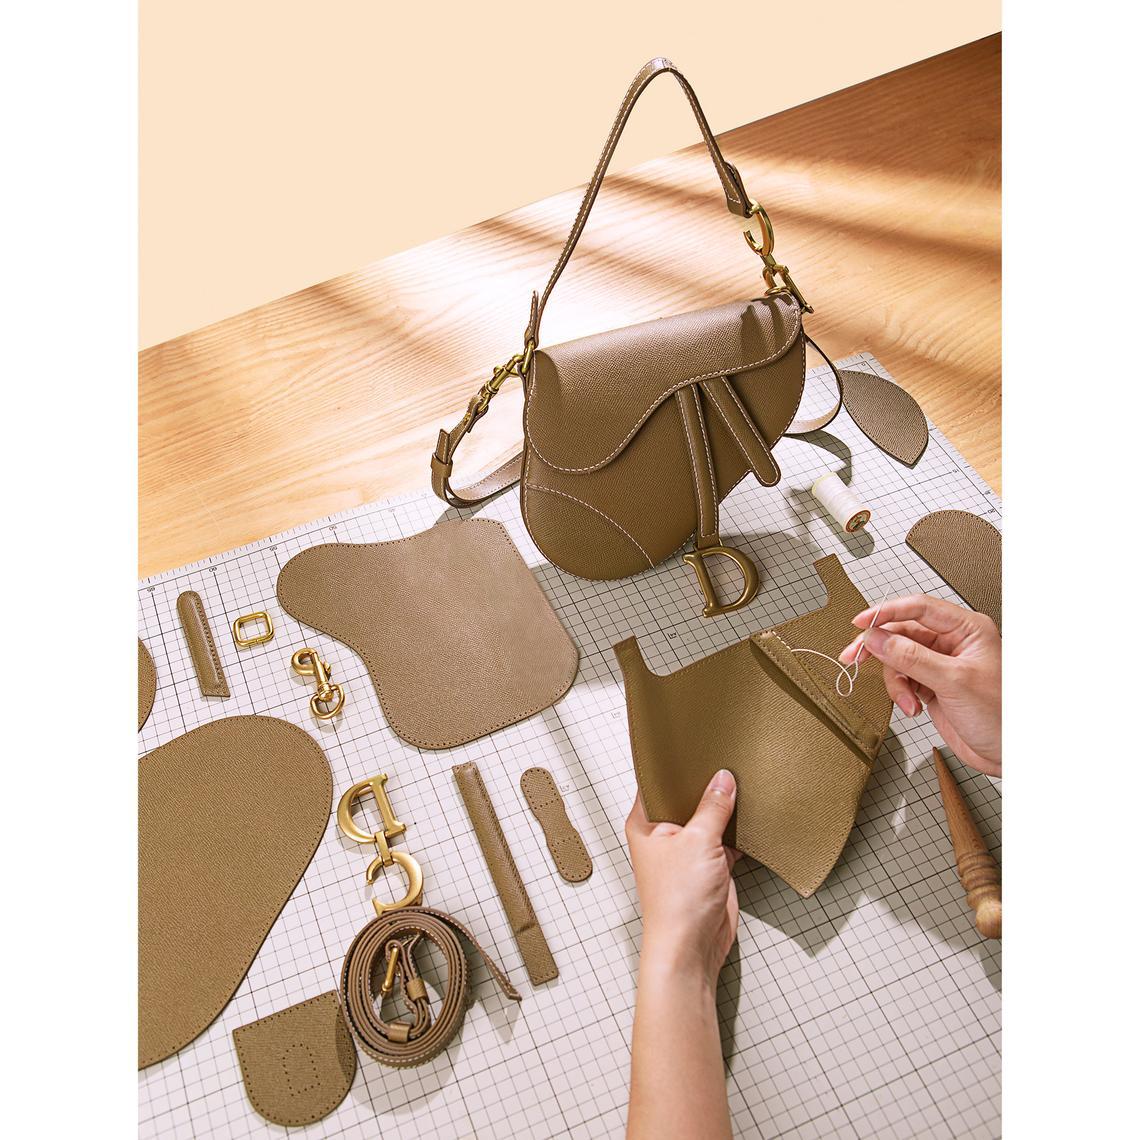  POPSEWING Puzzle Crossbody Bag DIY Kit for Women